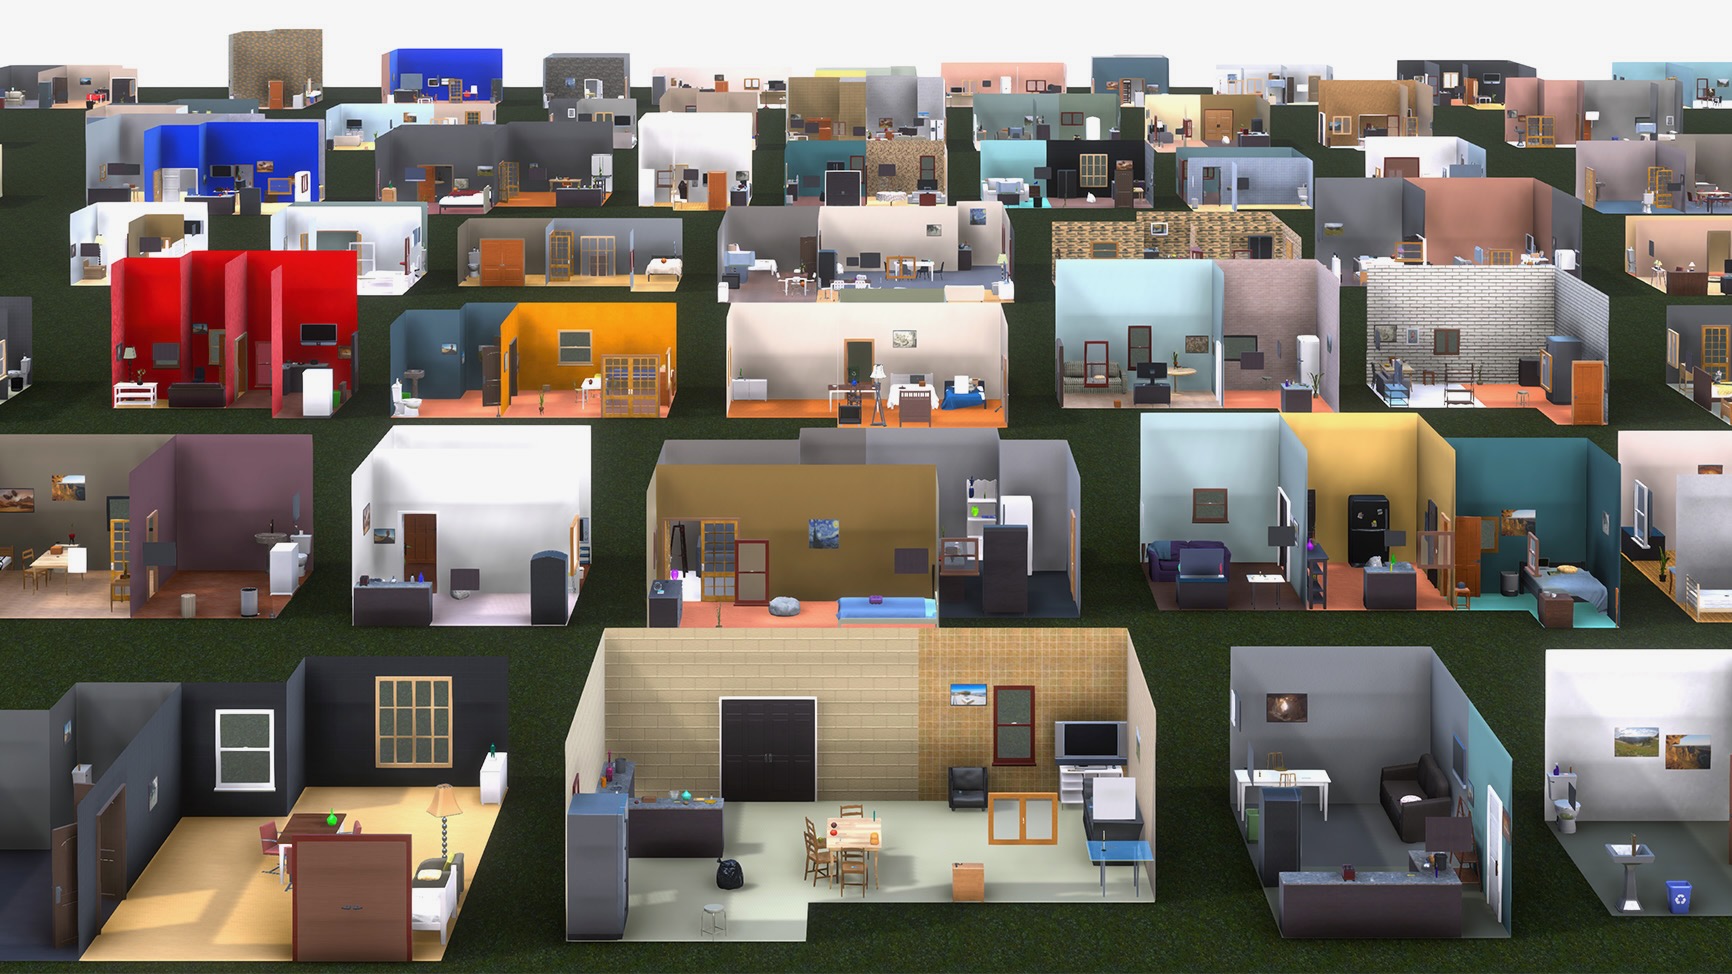 🏘️ ProcTHOR: Large-Scale Embodied AI Using Procedural Generation